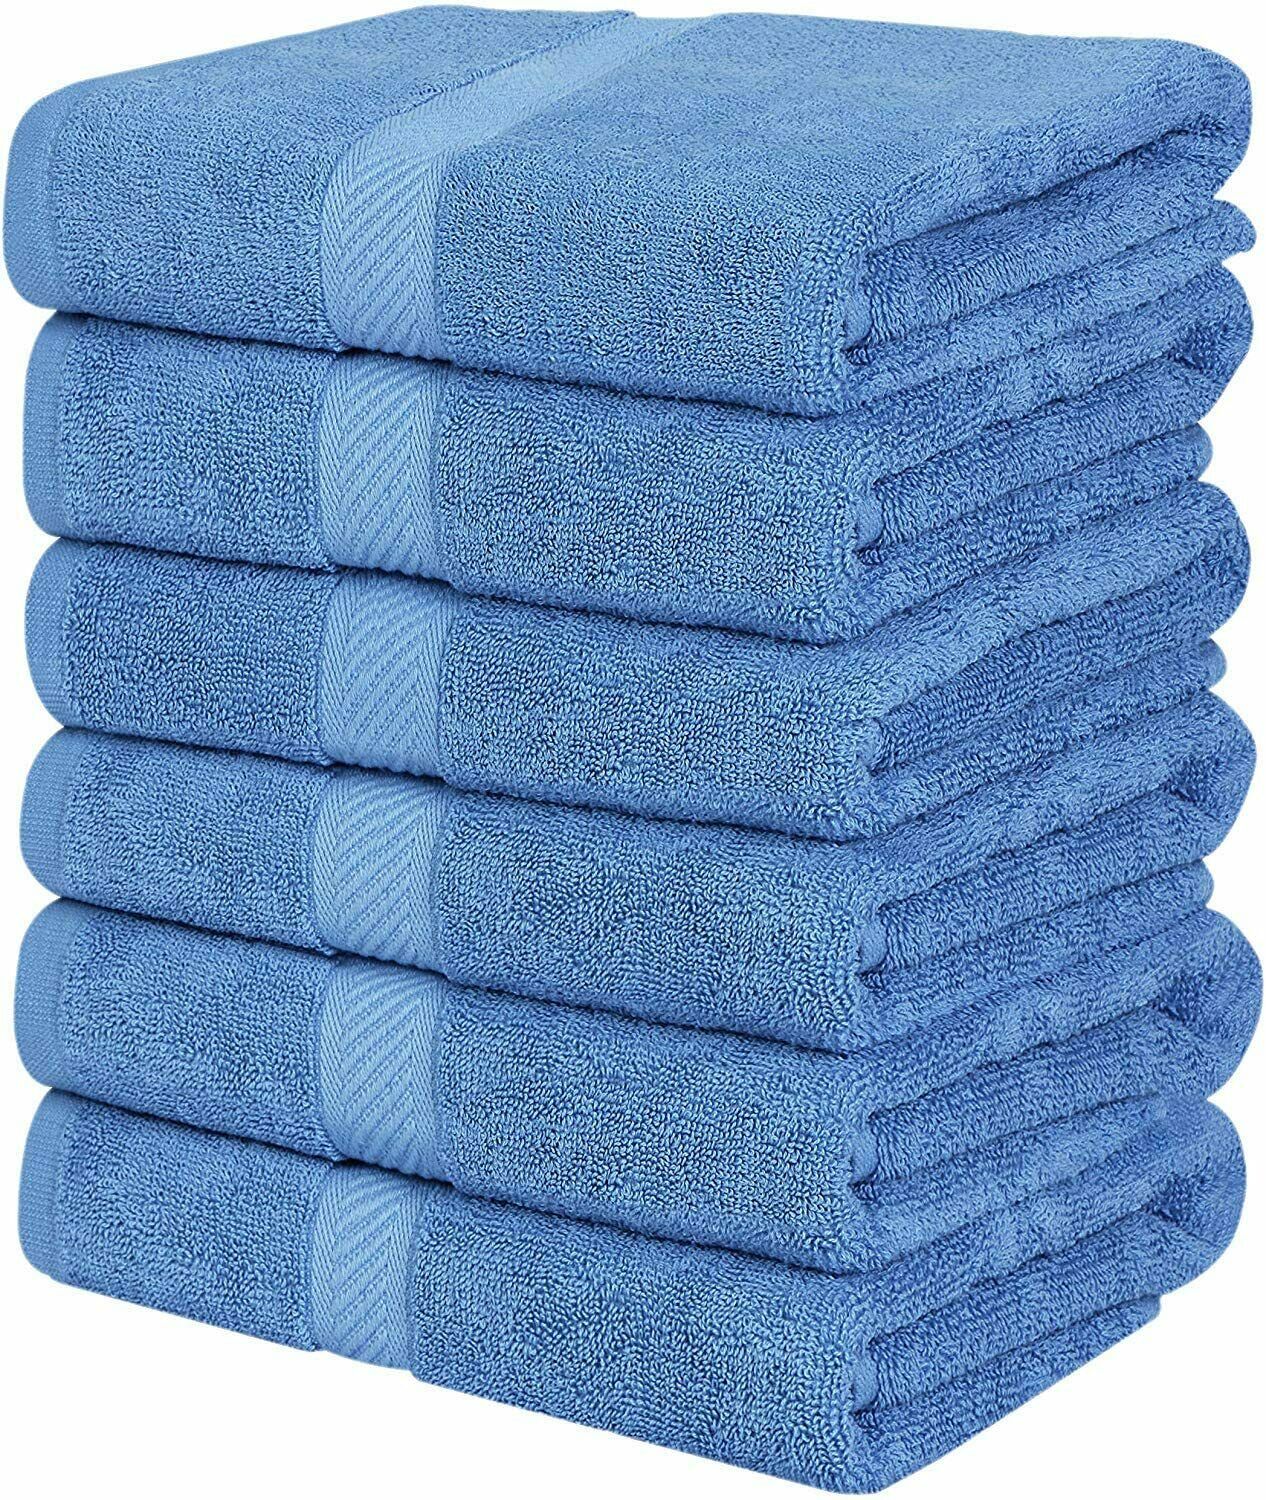 Utopia Towels Pack 6 Cotton Bath Towels 22x44 Inch Super Absorbent For Pool Spa